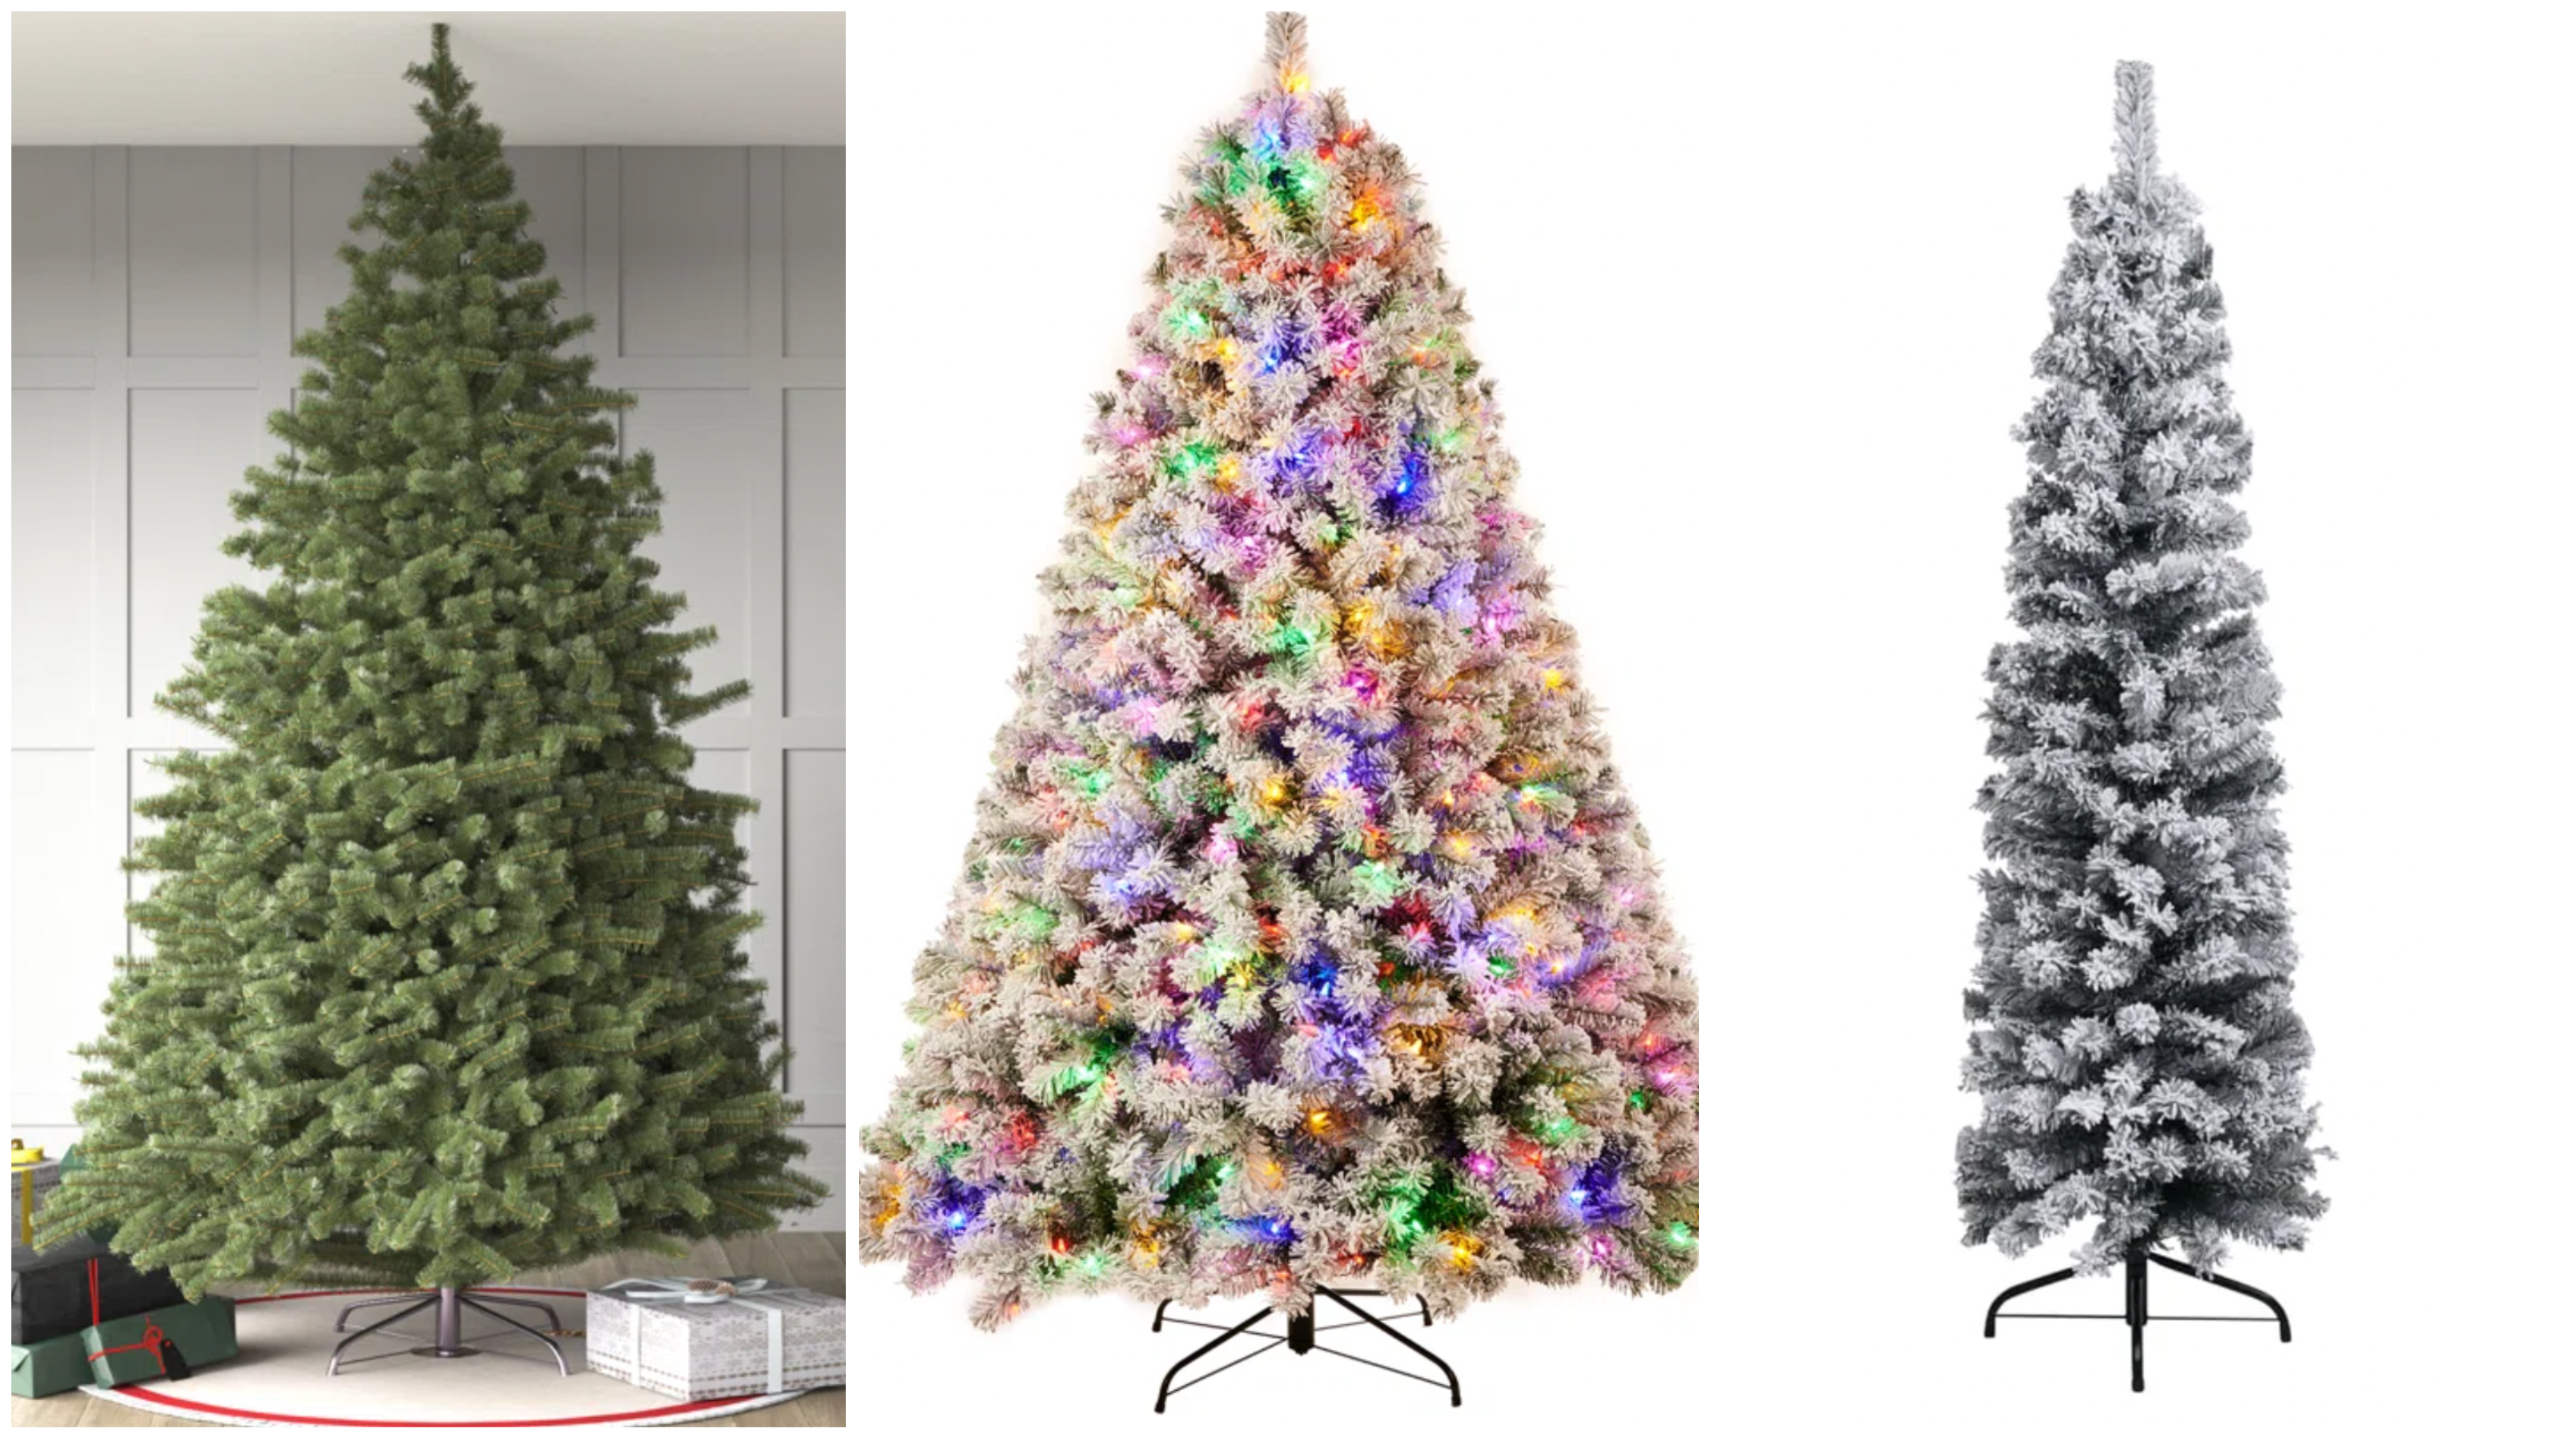 Flocking gives West Coast Christmas trees that snowy look